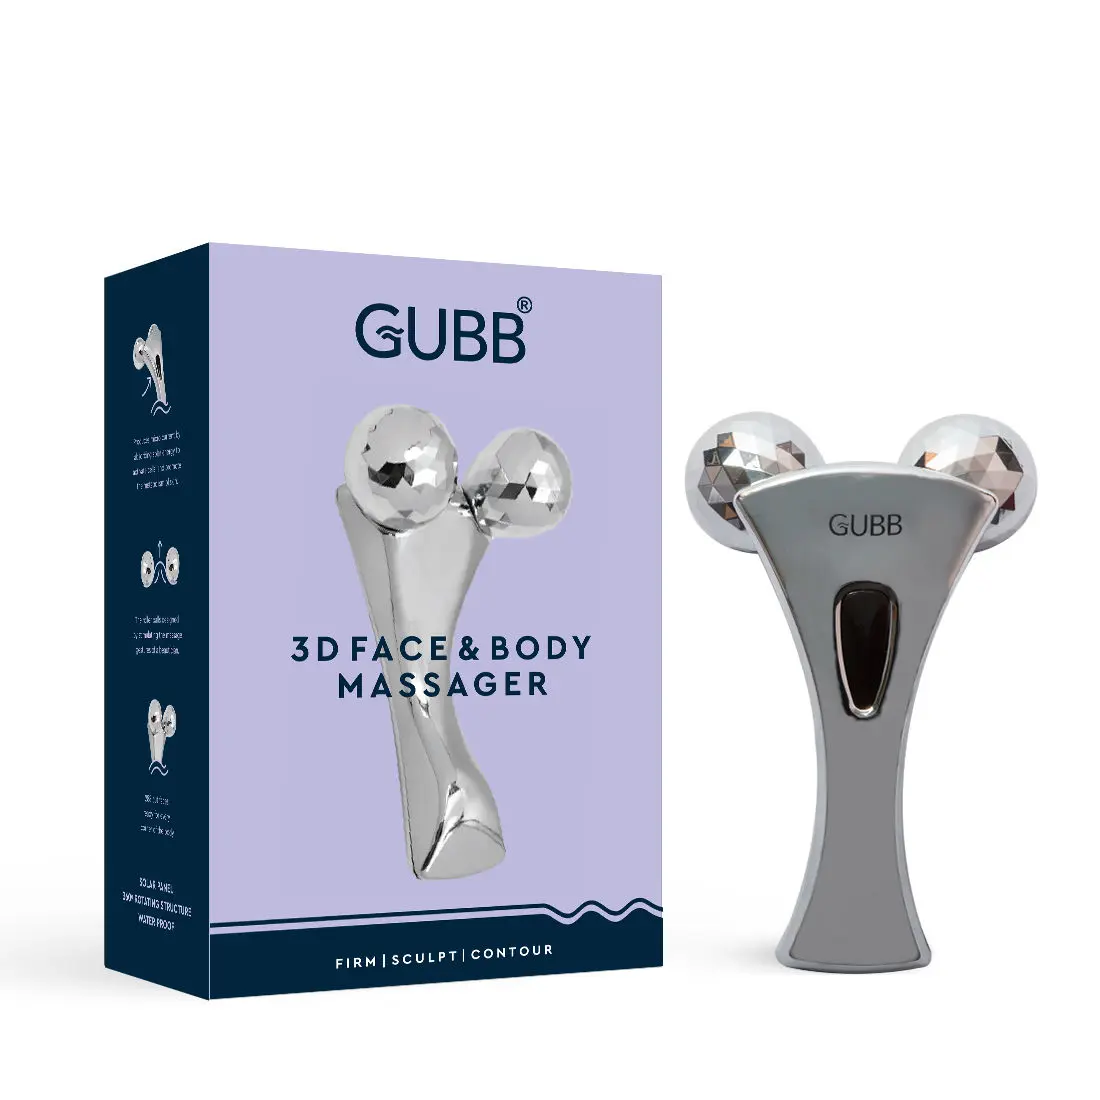 GUBB 3D Face & Body Massager for Skin Lifting, Tightening & Relaxation